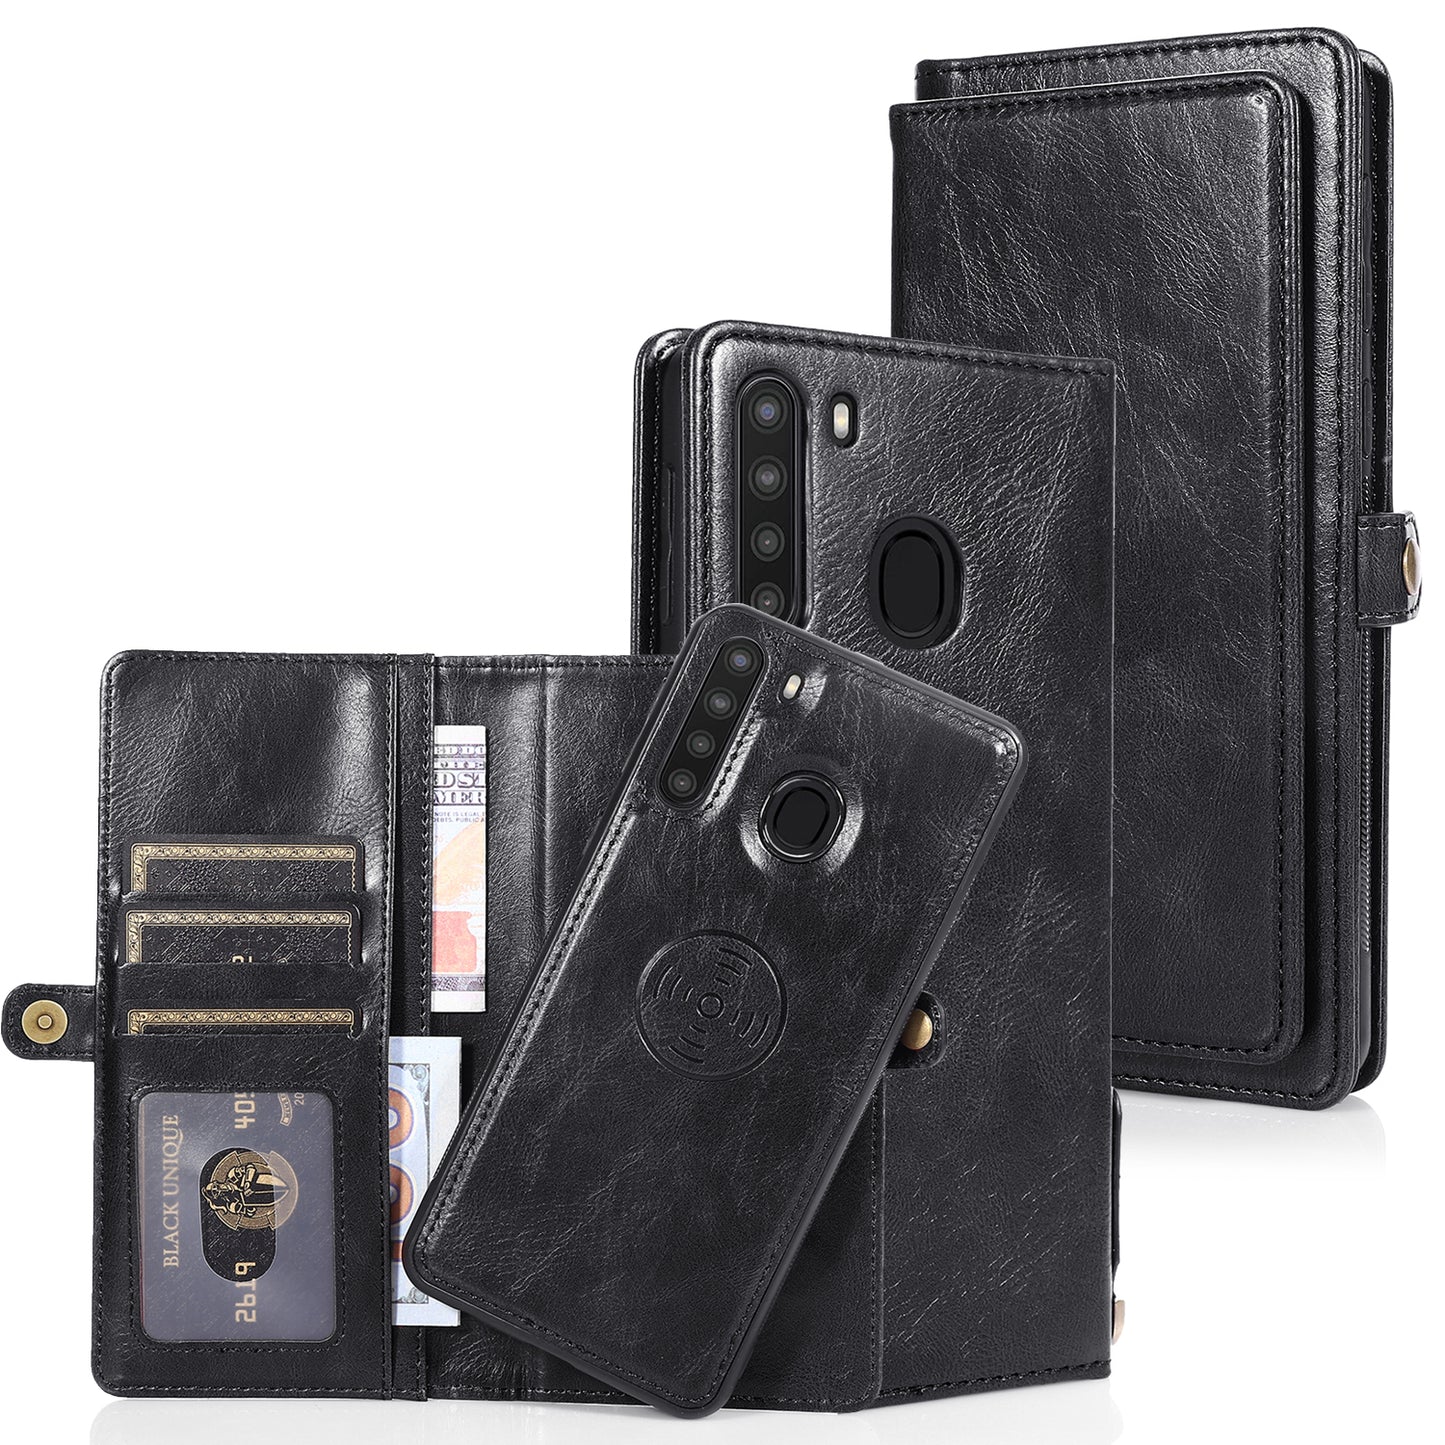 Samsung Galaxy A21 Leather Case Detachable Magnetic Multiple Card Slots Cash Pockets